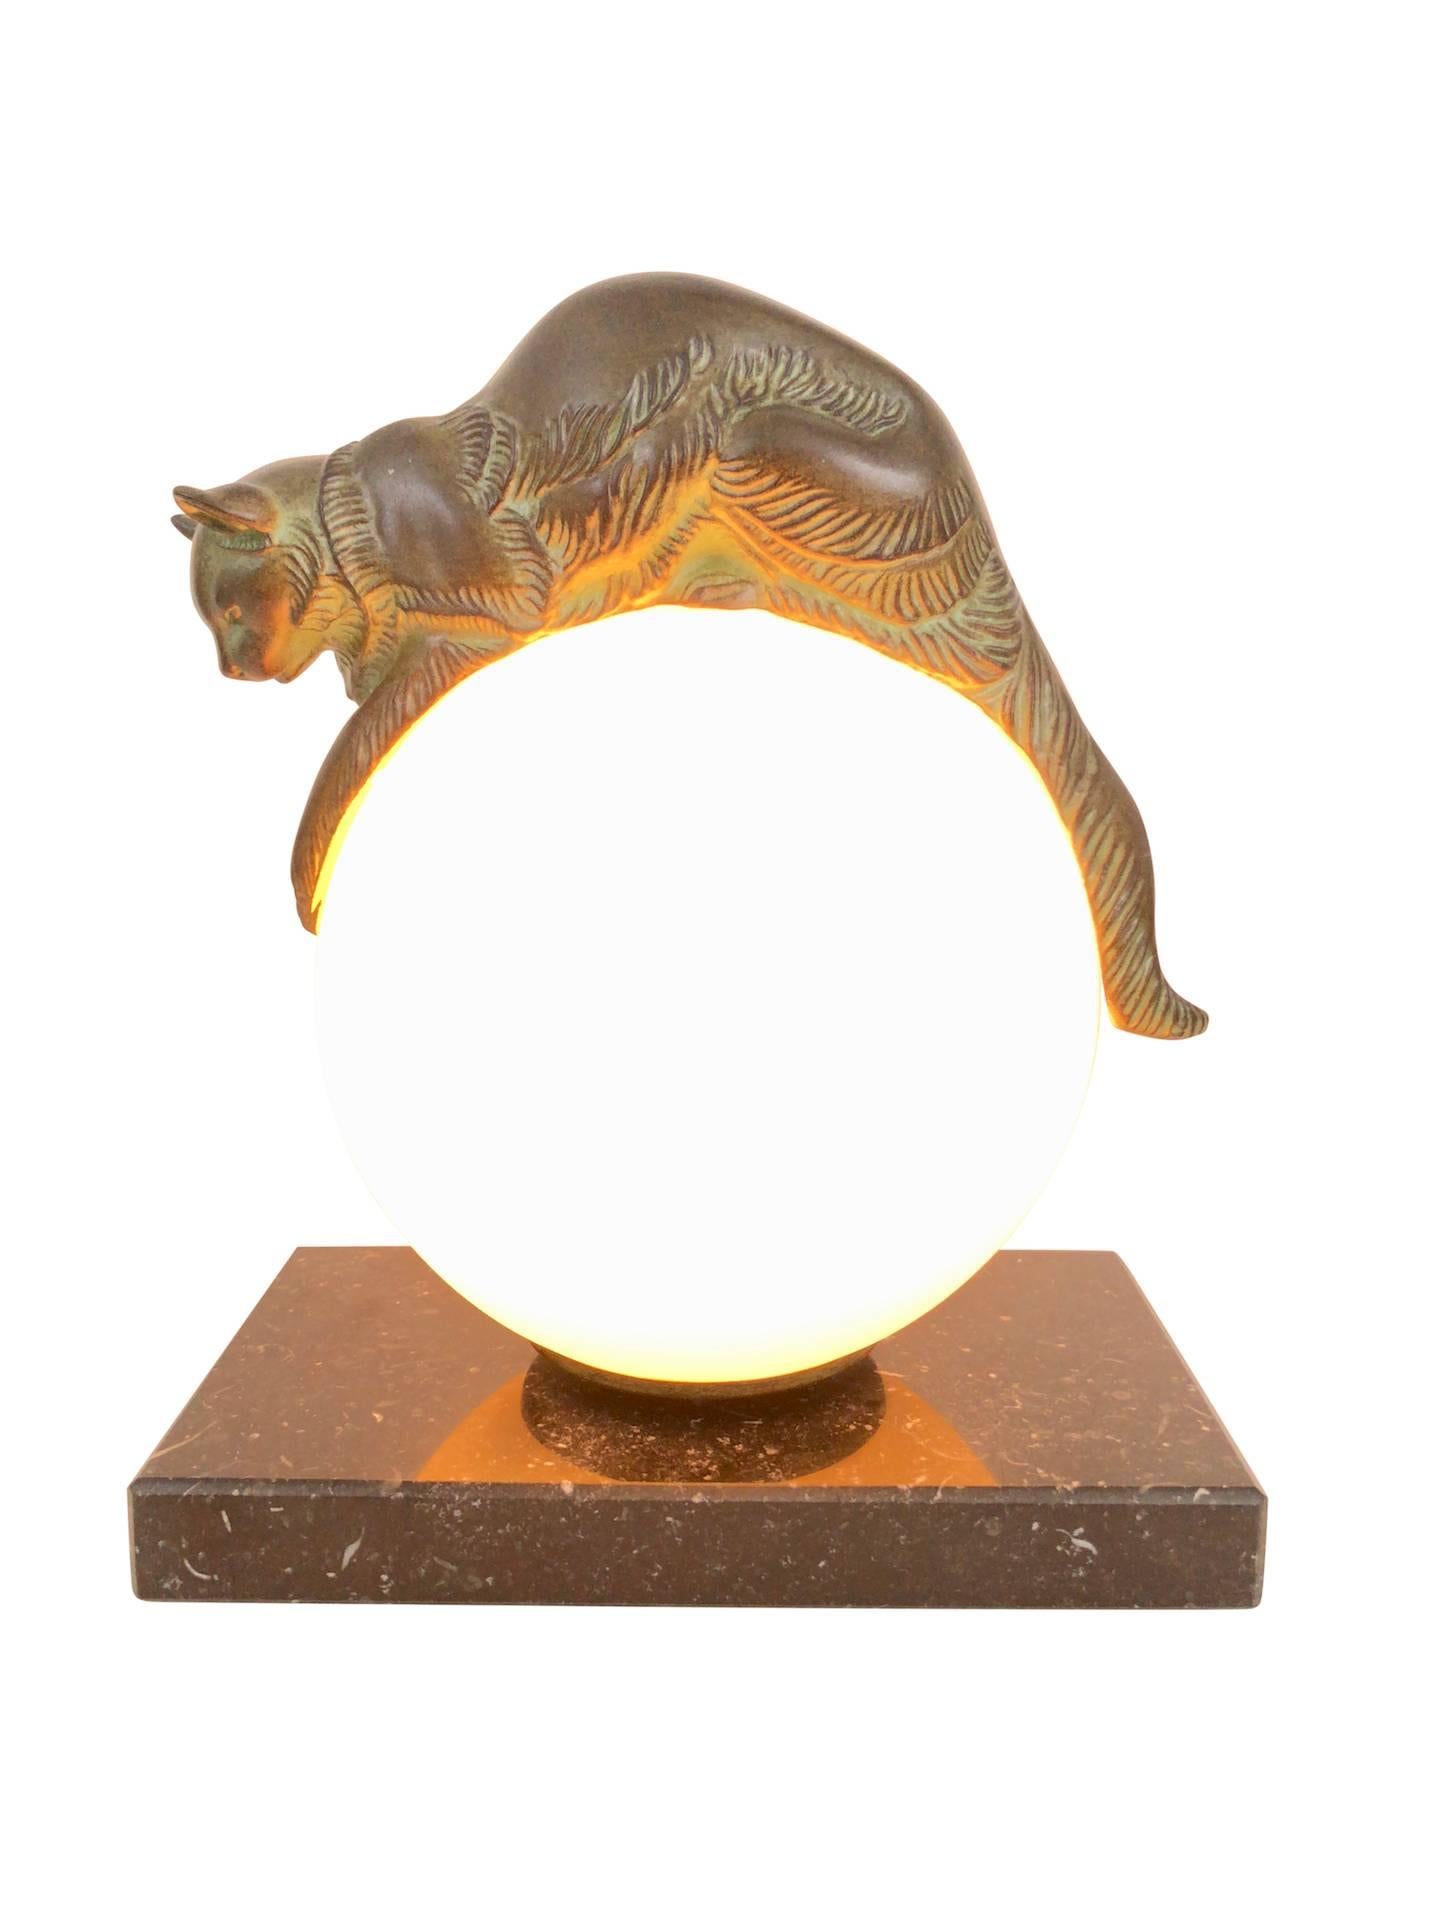 Spelter Table Lamp, Equilibre, Cat on Glass Ball, by Gaillard, Original Max Le Verrier